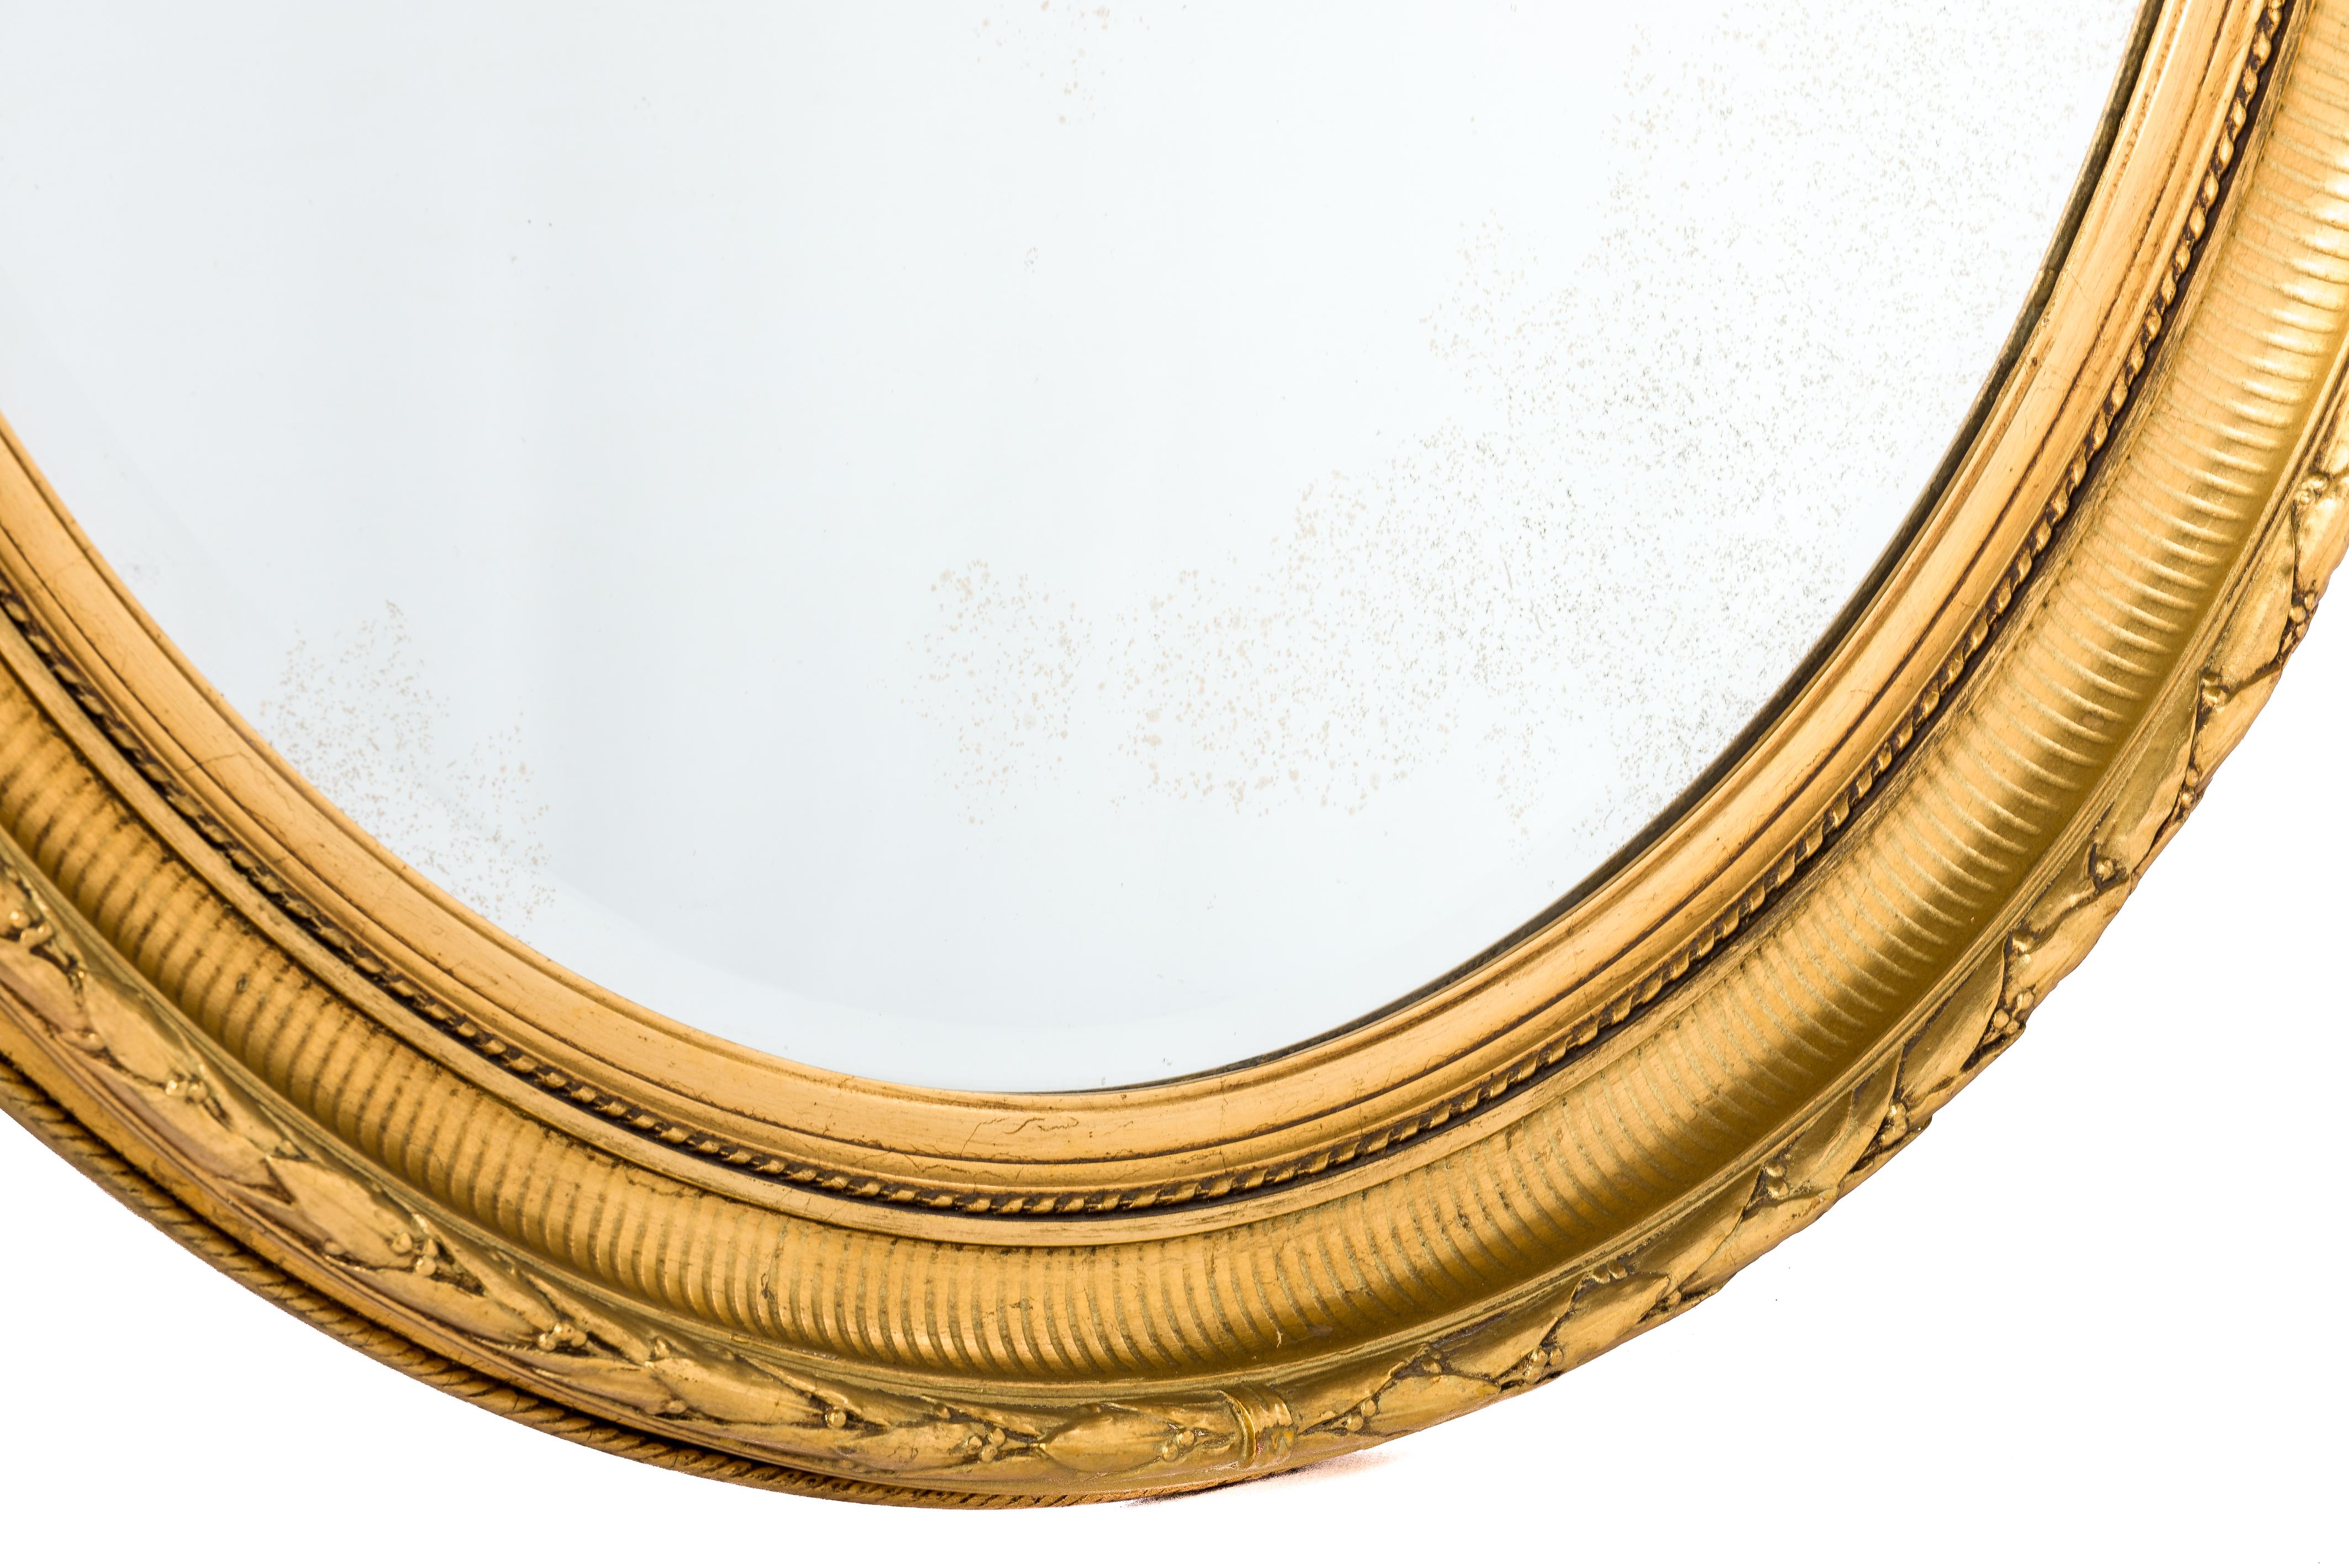 Louis XVI Antique 19th Century French Oval Gold Leaf Gilt Louis Seize or Empire Mirror For Sale